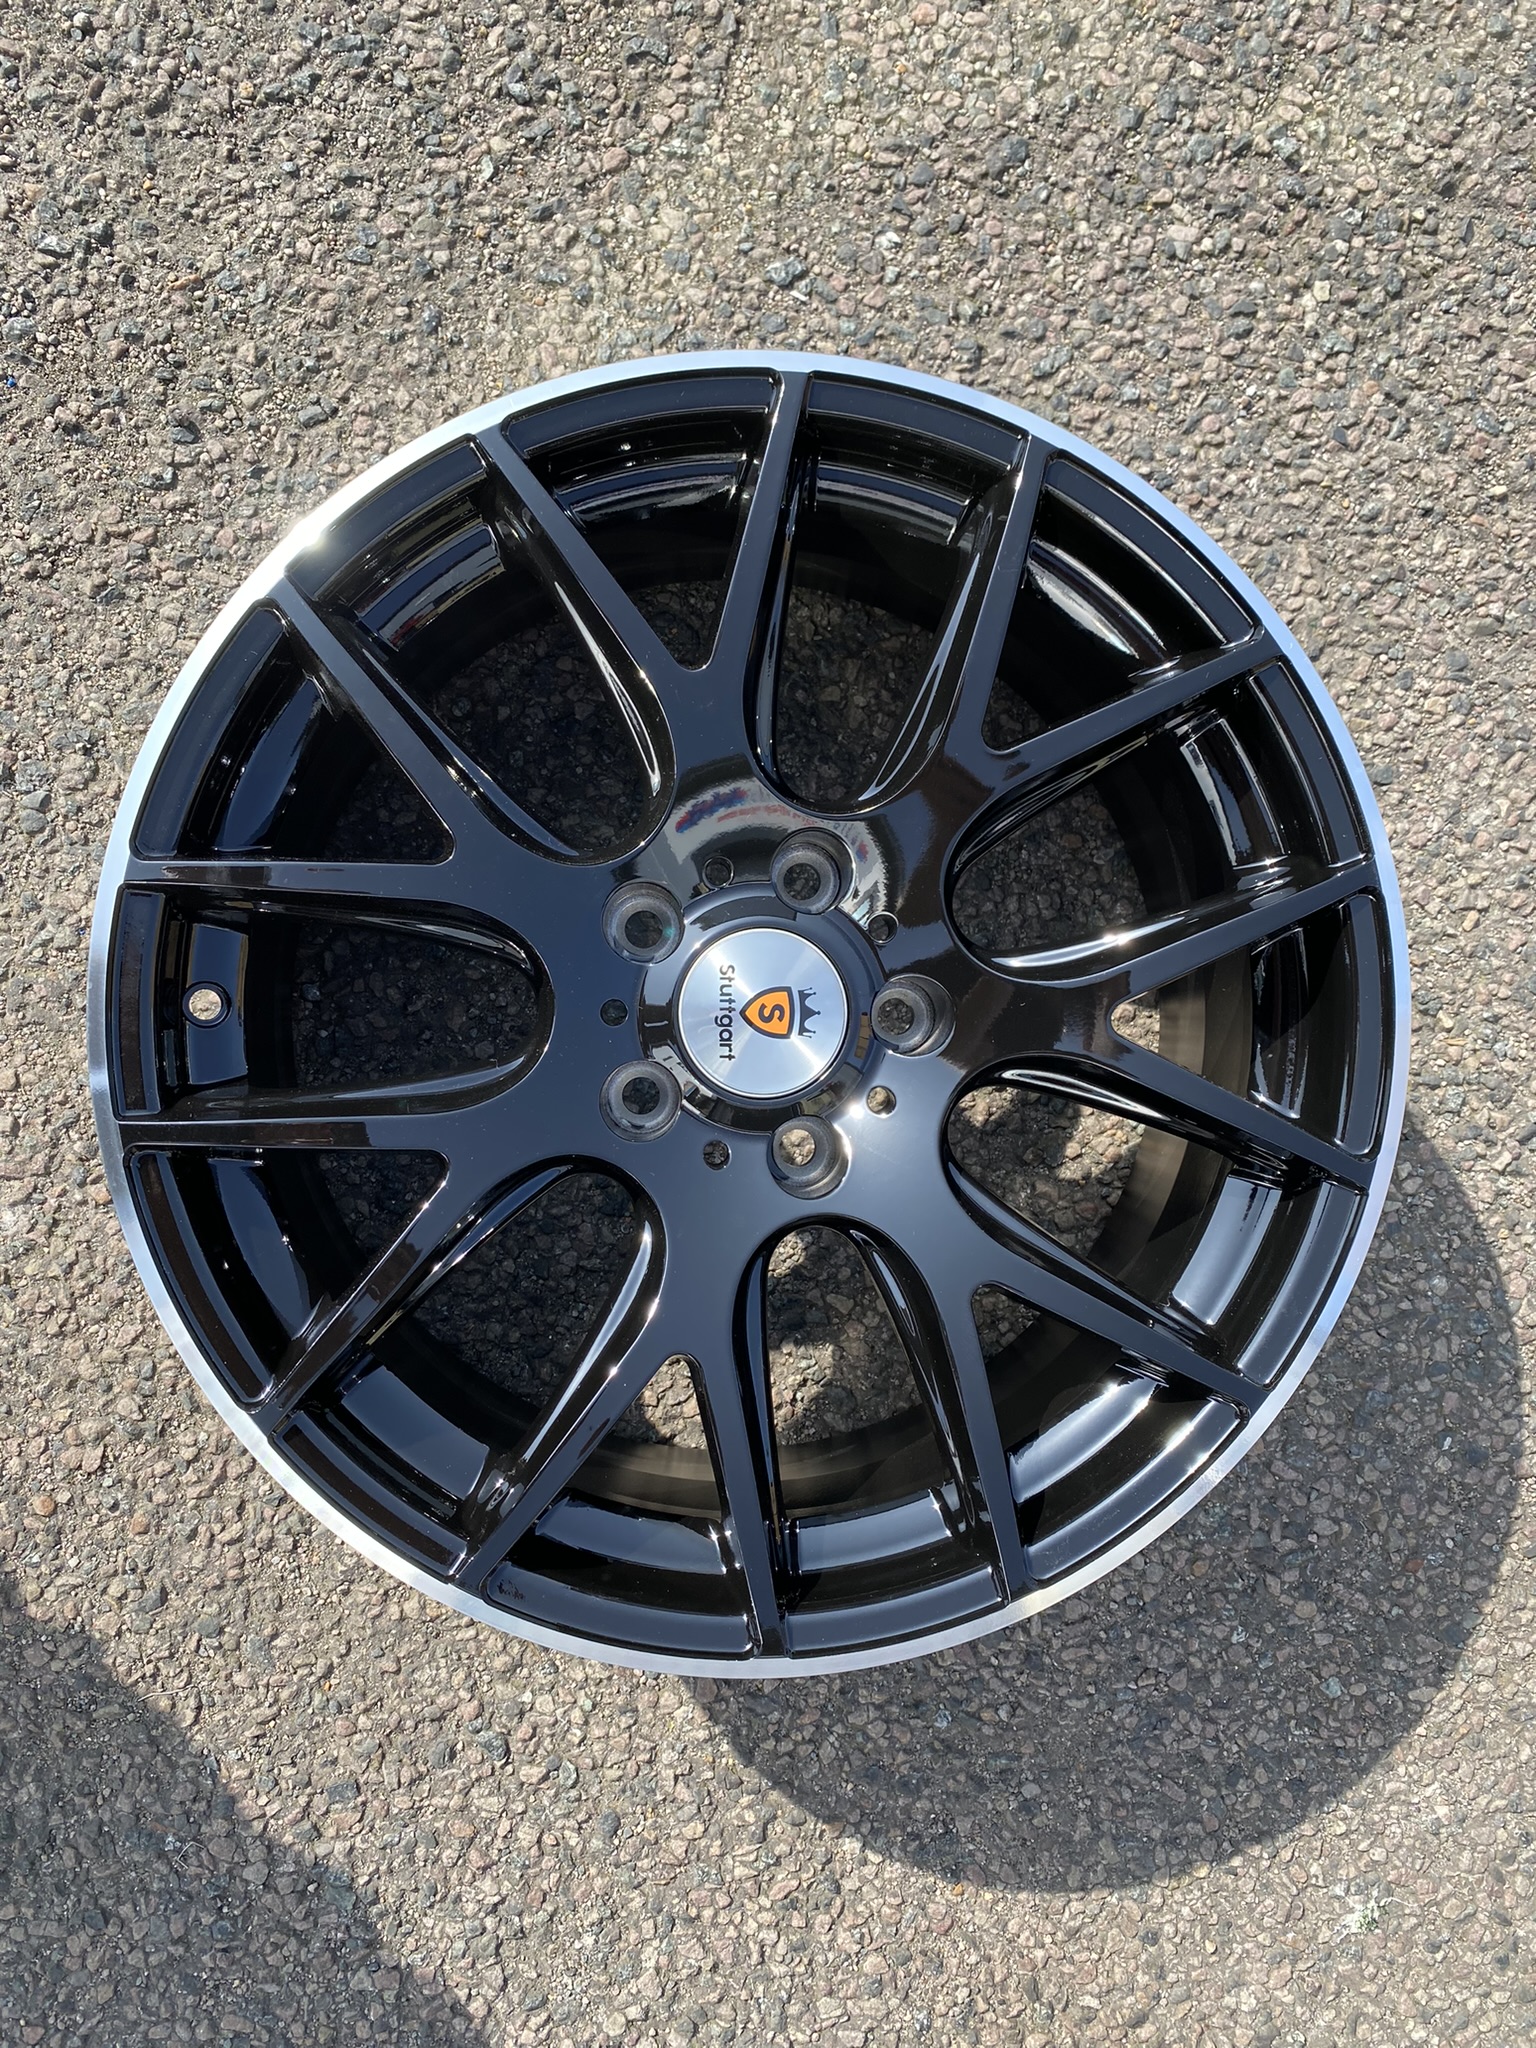 NEW 18" STUTTGART ST3 ALLOY WHEELS IN GLOSS BLACK WITH POLISHED LIP 8.5"et35 ALL ROUND